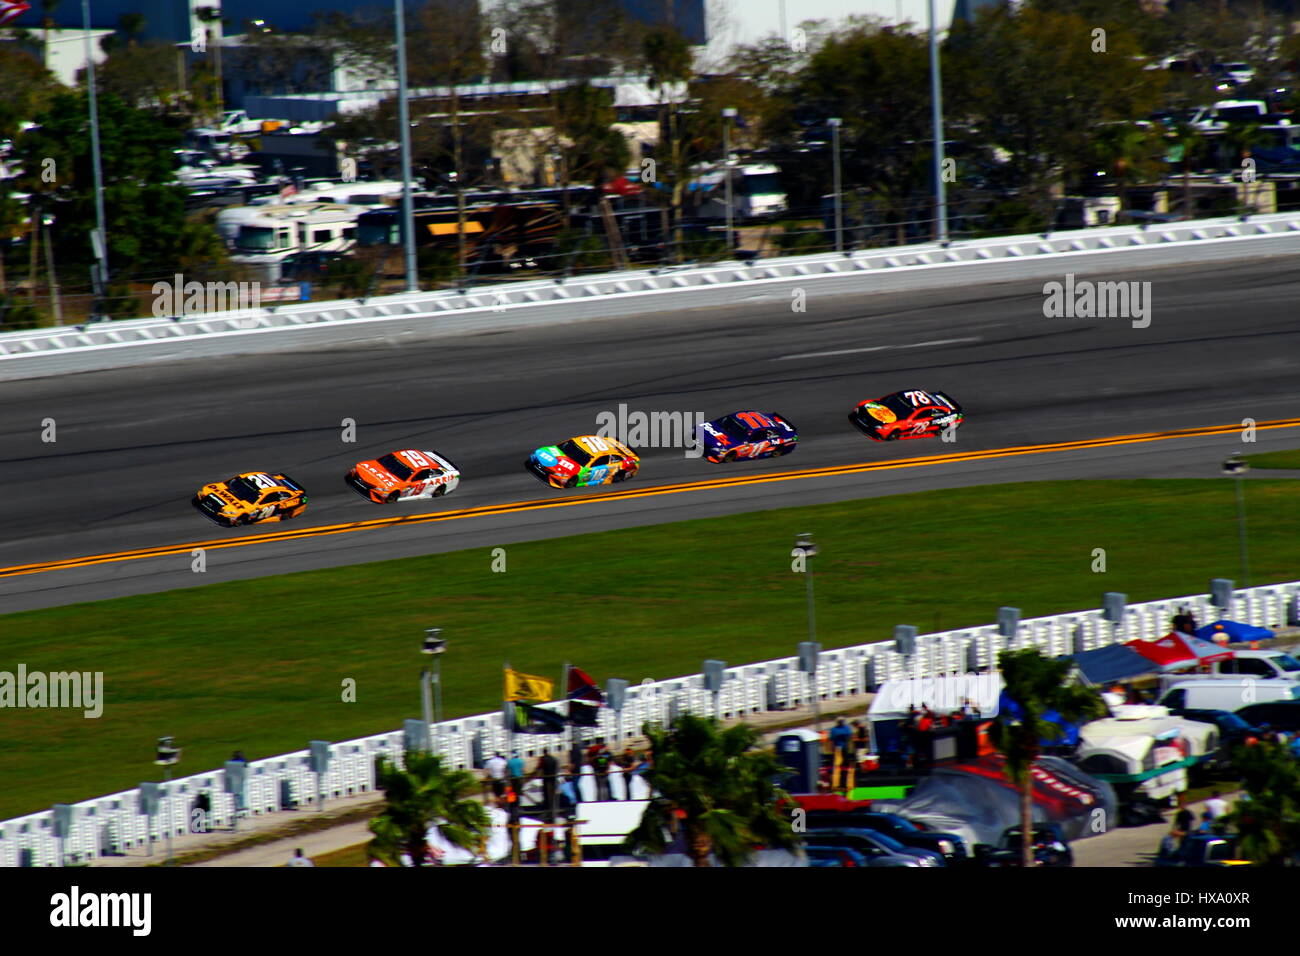 A group of NASCAR Toyota Camrys work together in the opening laps of the 2017 Daytona 500. Stock Photo